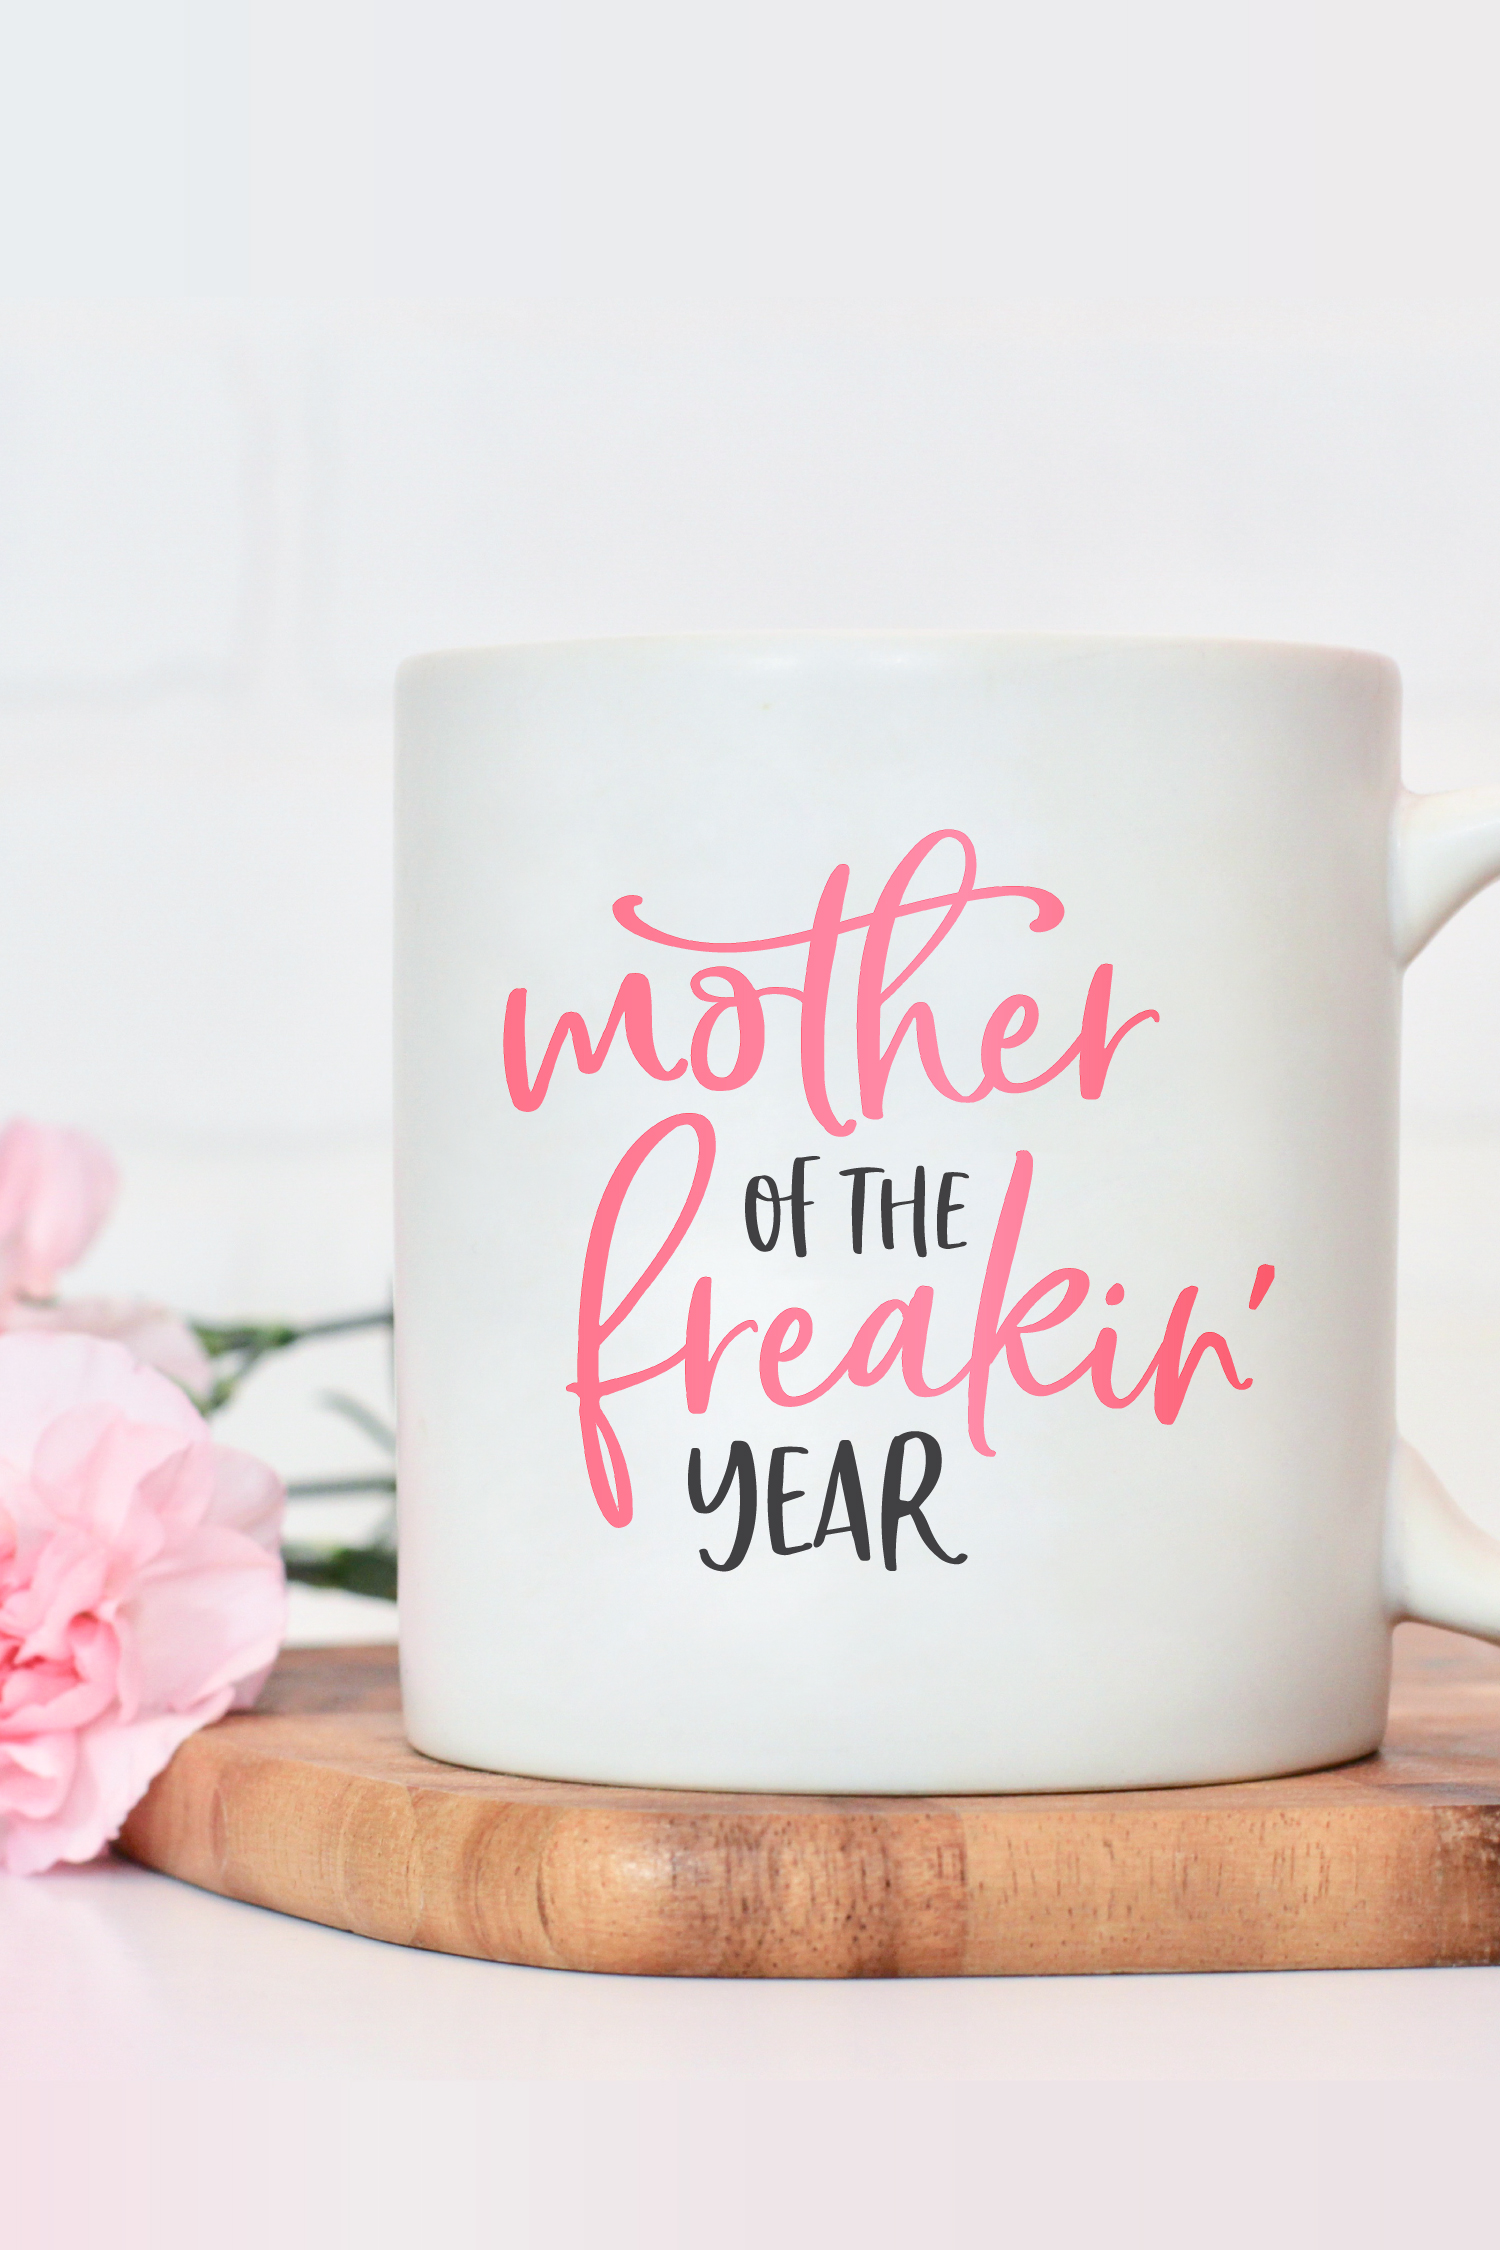 Cricut Mother's Day Sale - Make Mom's Day! - Thrifty Jinxy